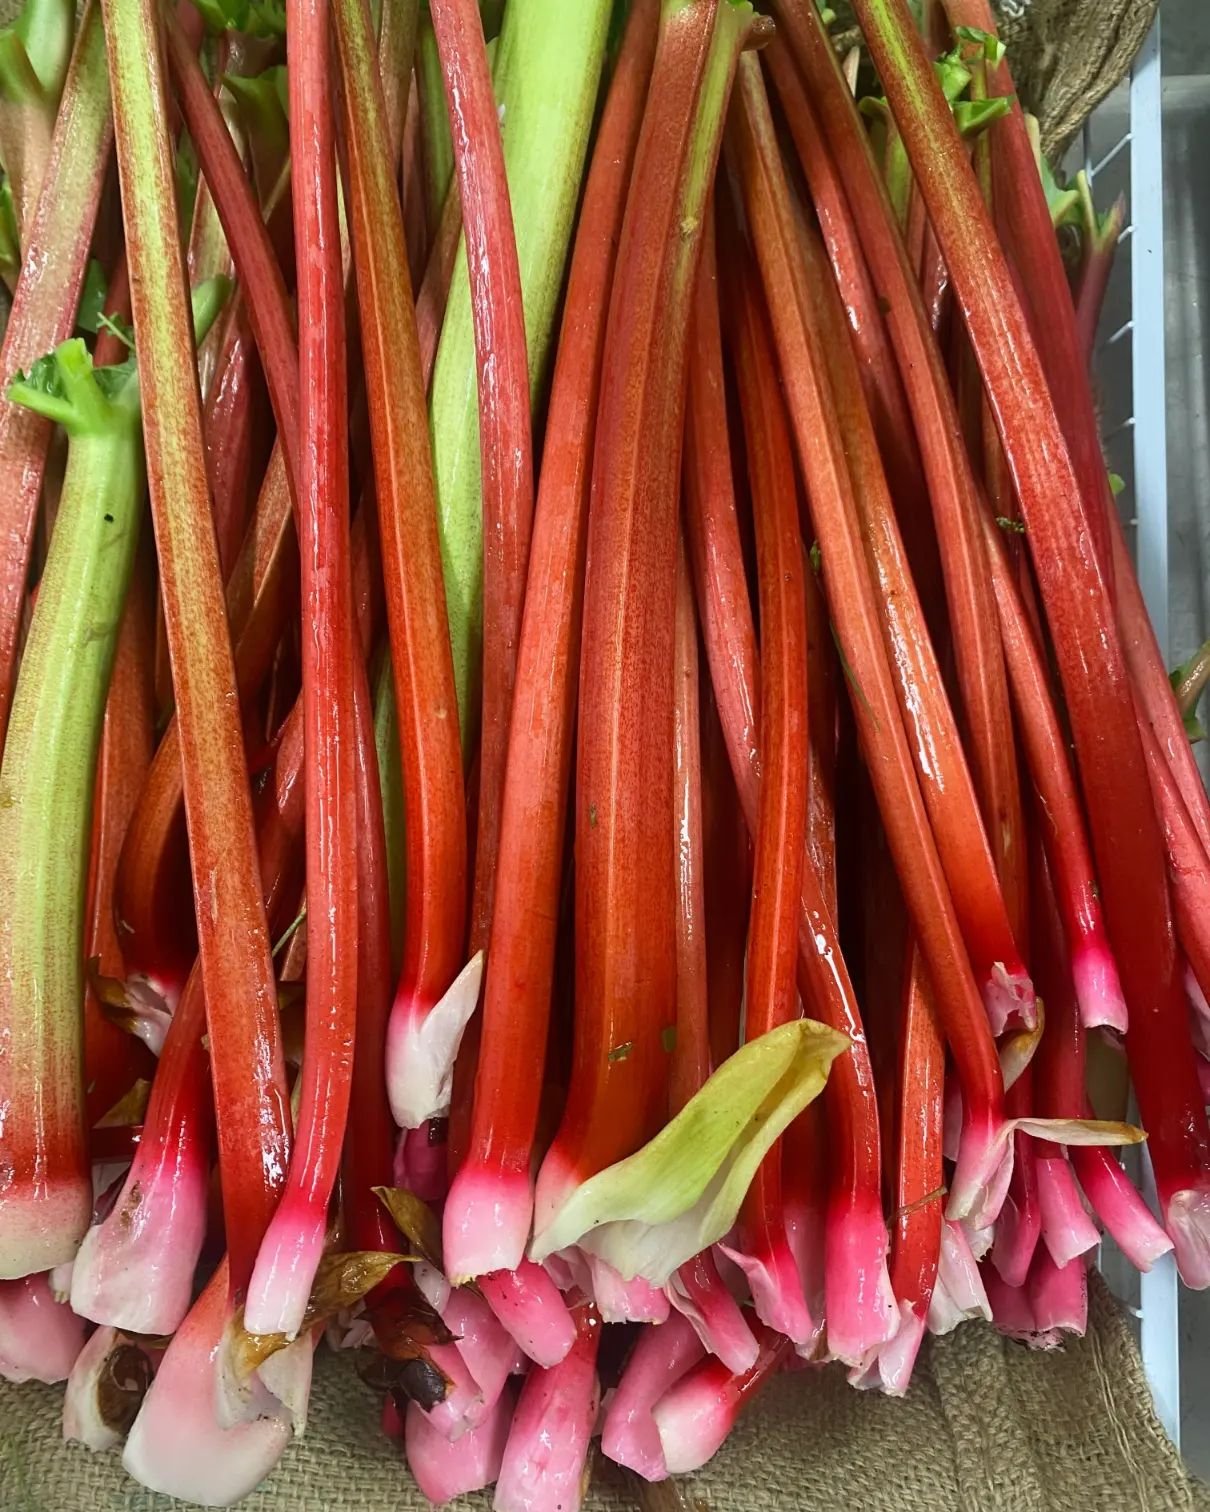 Happy Thursday! ☔ It might be grey and wet out there, but our market is bursting with fresh, vibrant, colourful local produce!! We're open 10-5, Thursday to Sunday so drop by to #ShopLocal!
 
🩷 First of the season spring rhubarb was freshly harveste